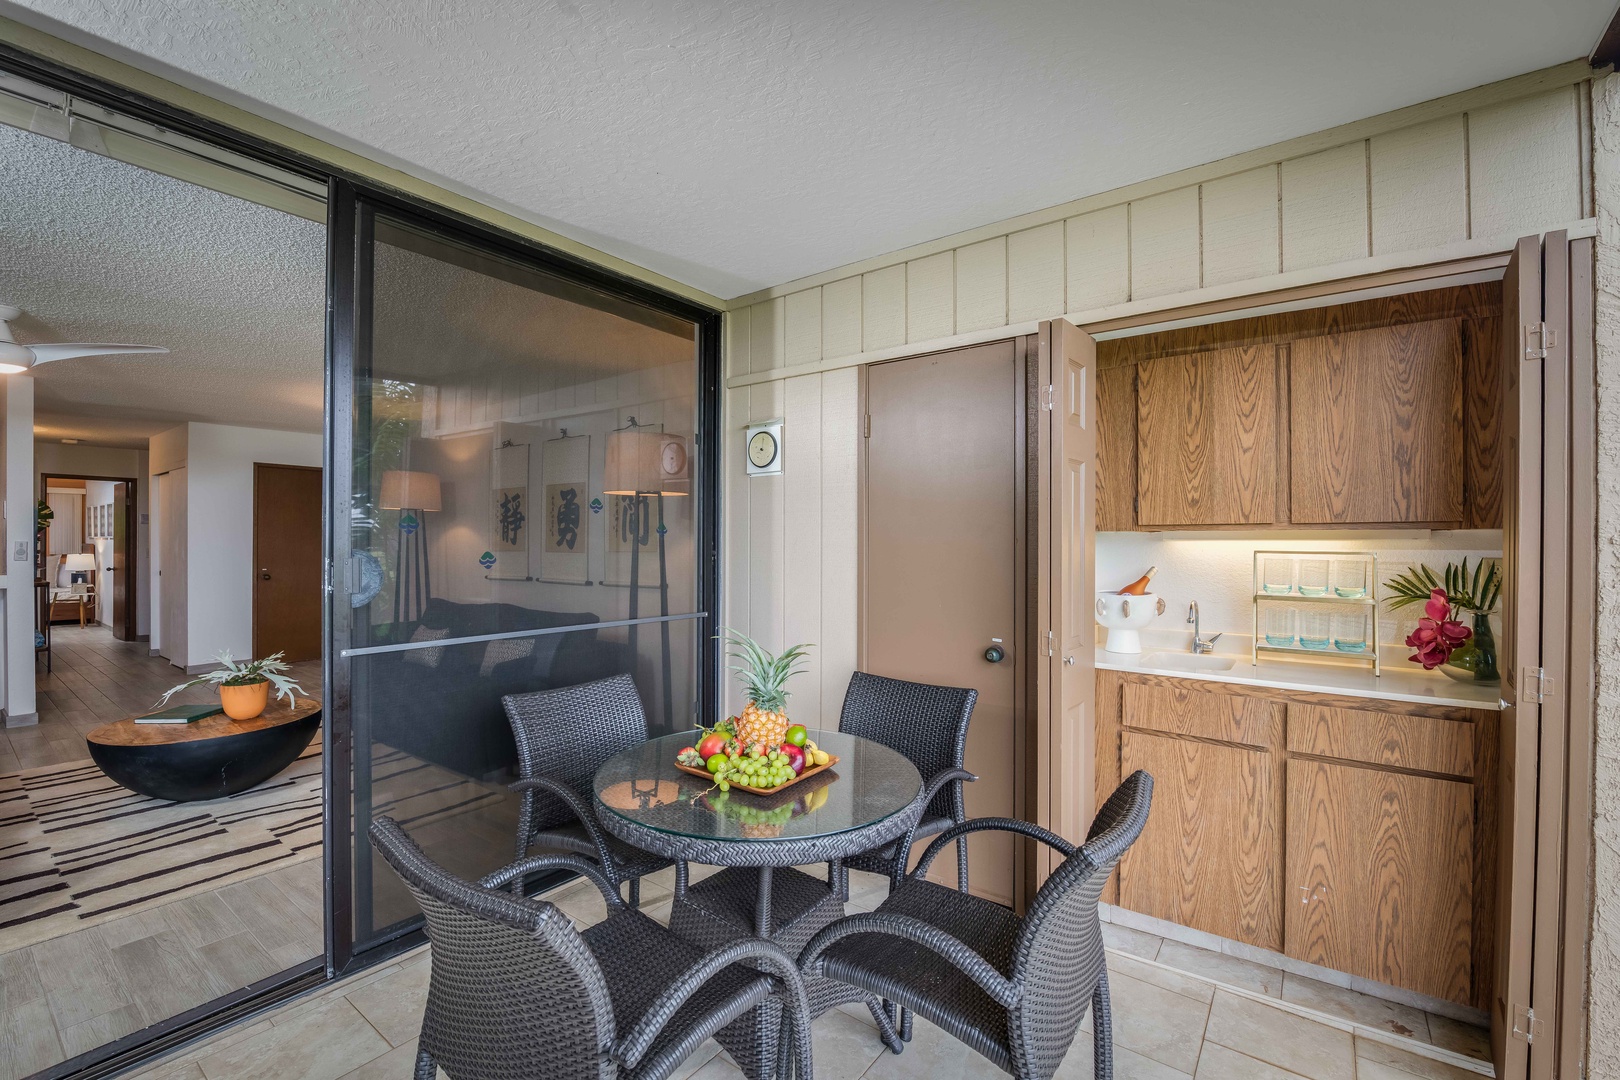 Waikoloa Vacation Rentals, Waikoloa Villas A107 - Your Private Terrace w/ Wet Bar for Sunset Happy Hour!